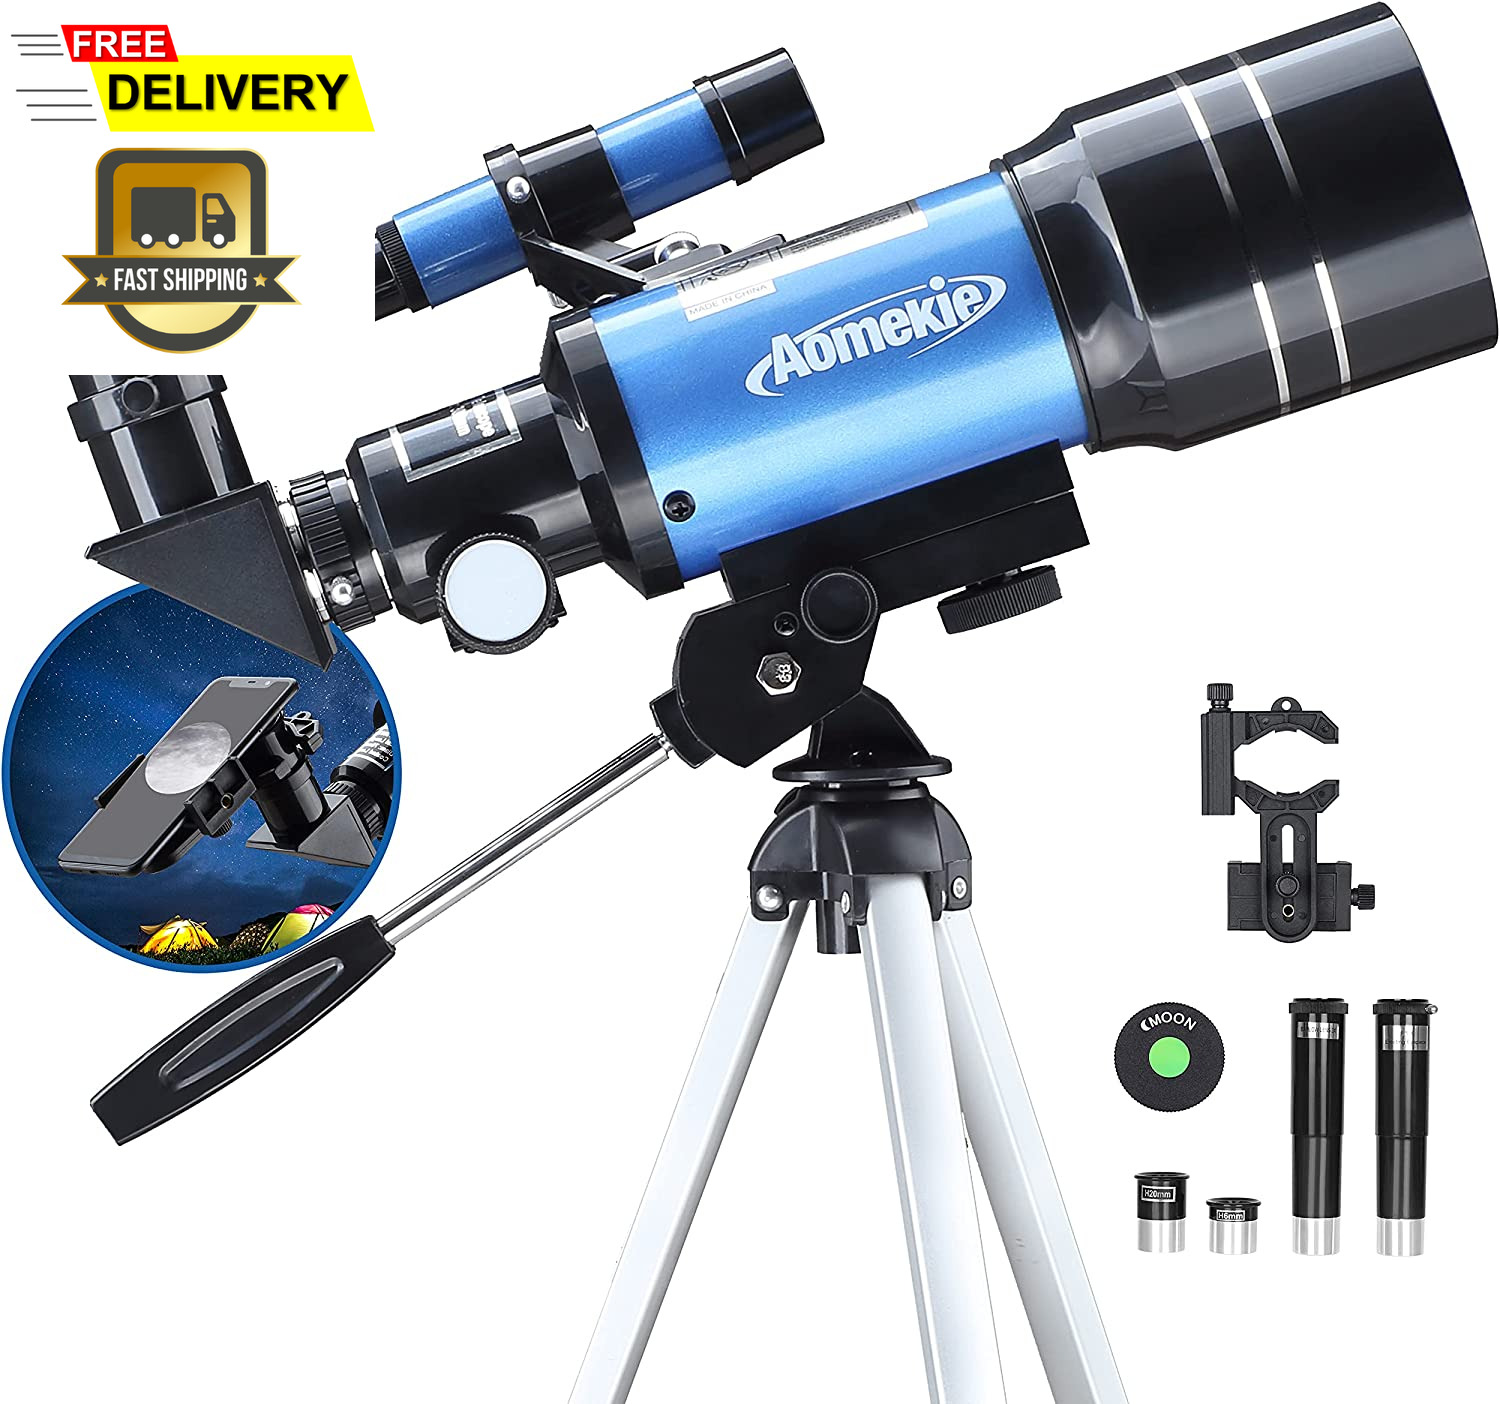 700mm Reflector Astronomical Telescope 150X with Phone Adapter for Moon Watching